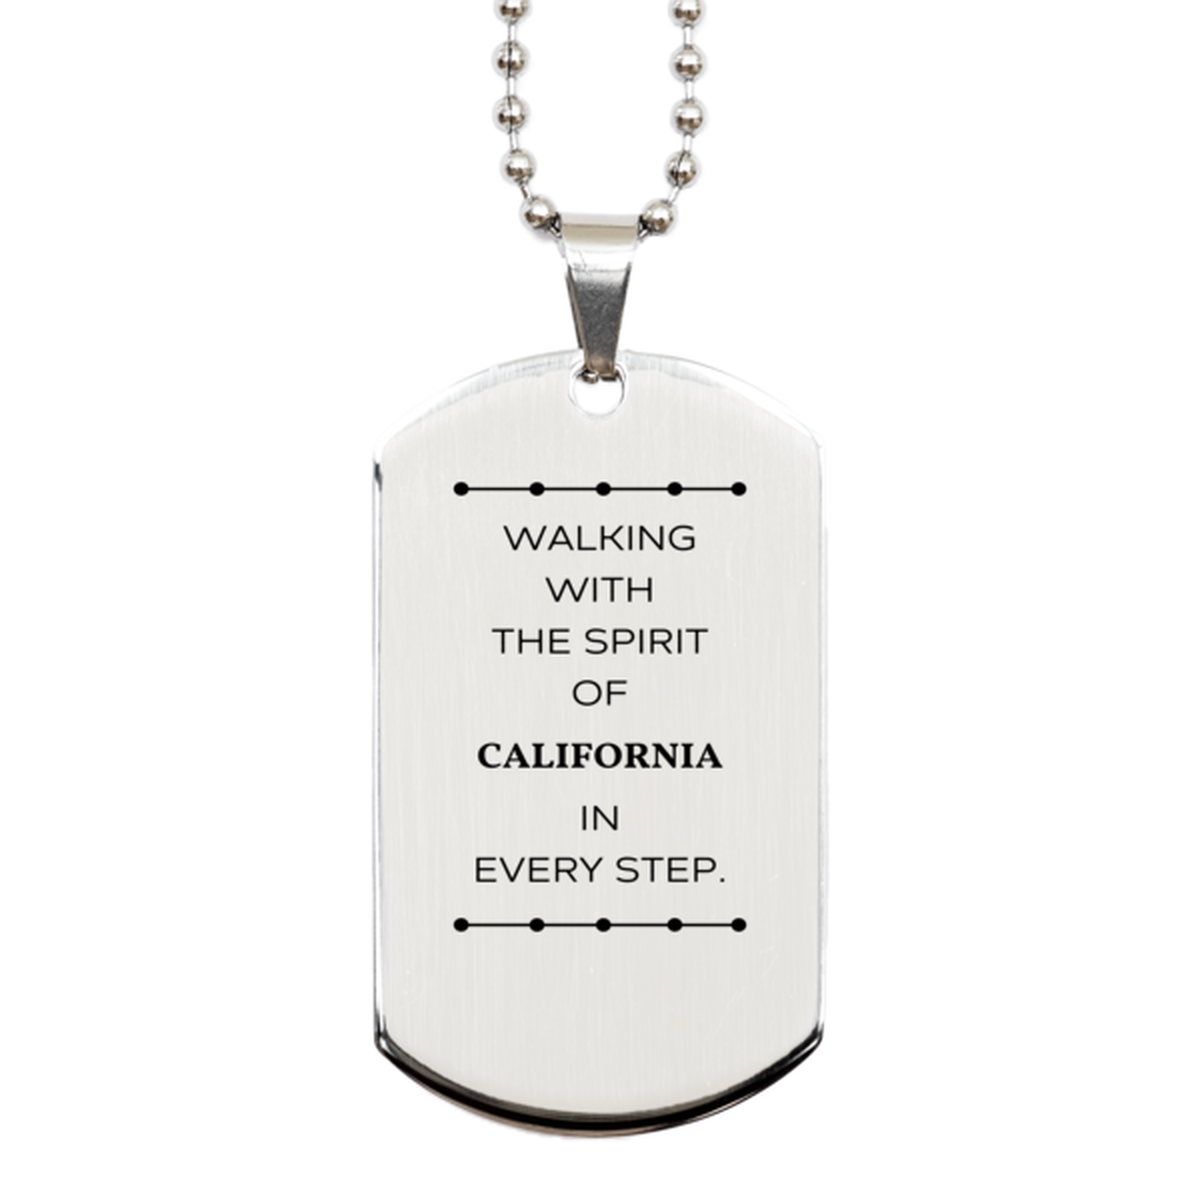 California Gifts, Walking with the spirit, Love California Birthday Christmas Silver Dog Tag For California People, Men, Women, Friends